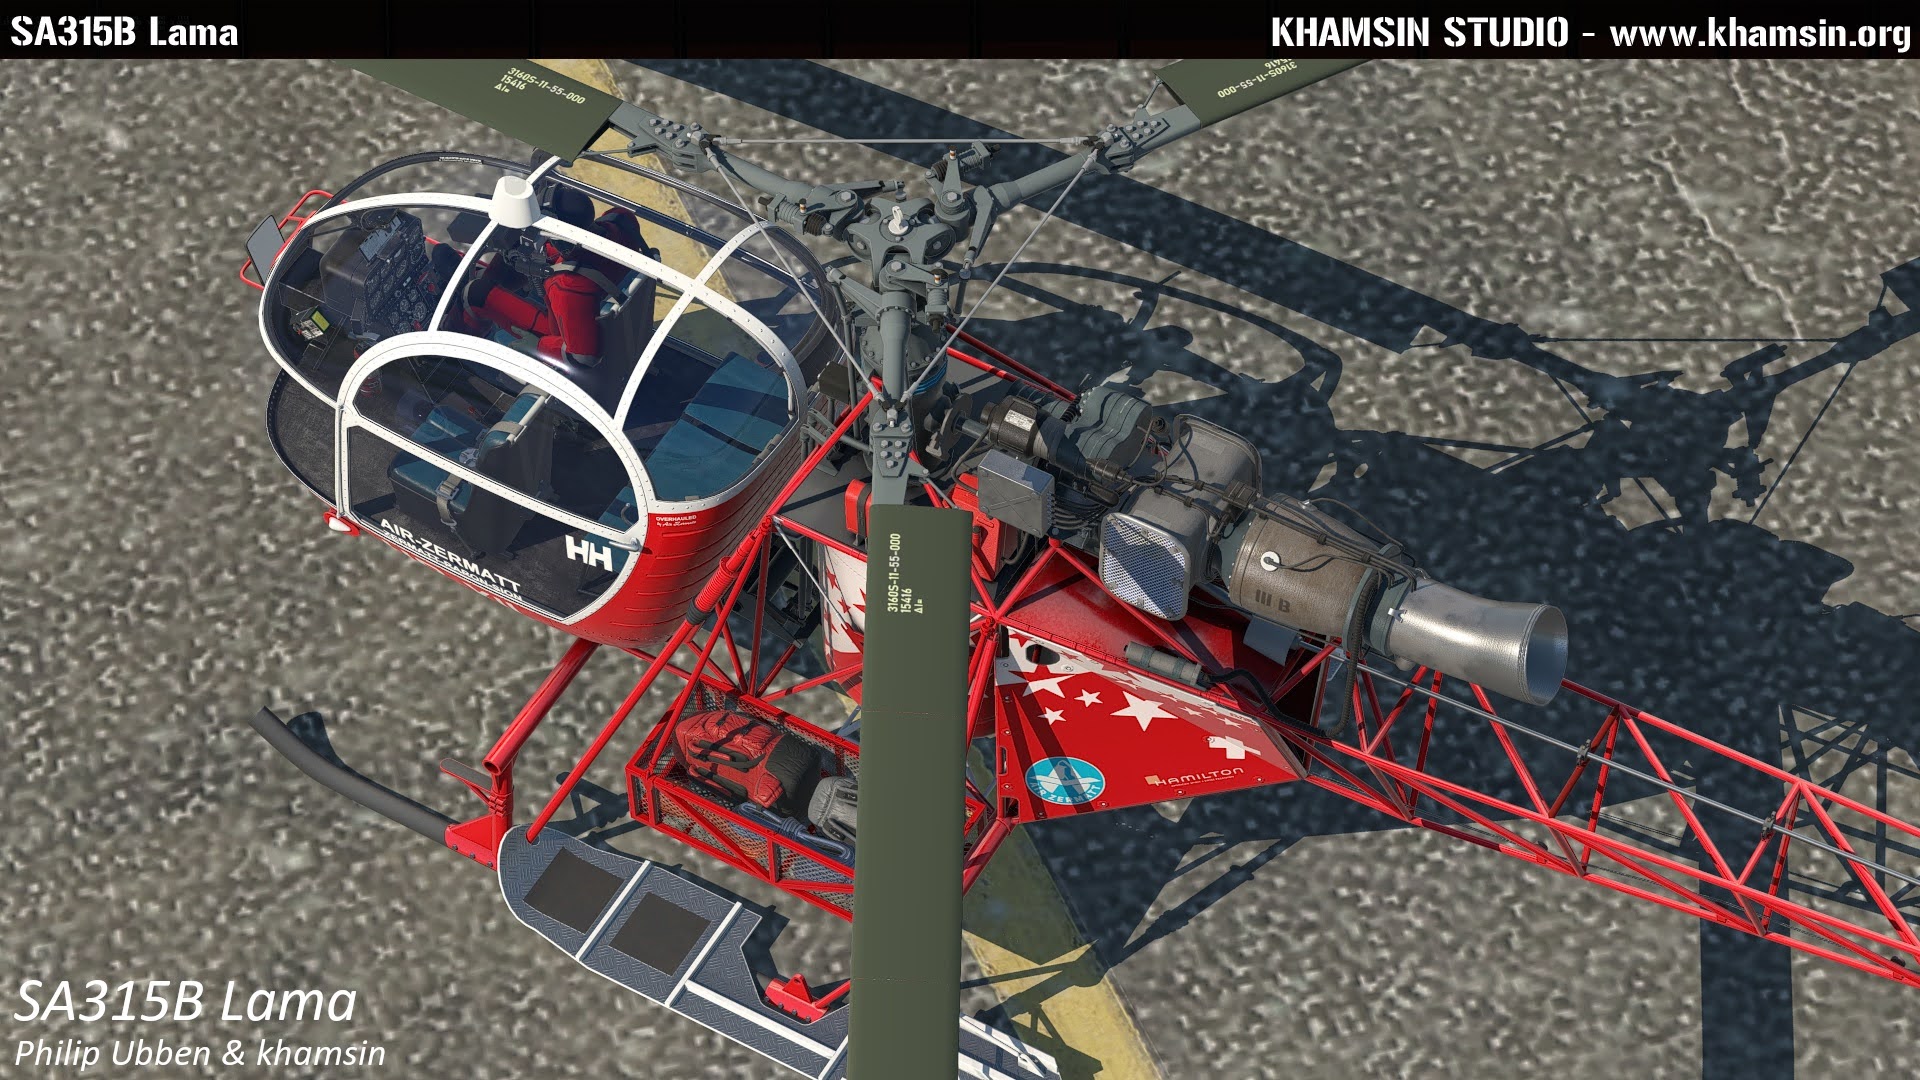 Philip Ubbem Releases SA 315B Lama Helicopter for X-Plane - Philip Ubben, X-Plane